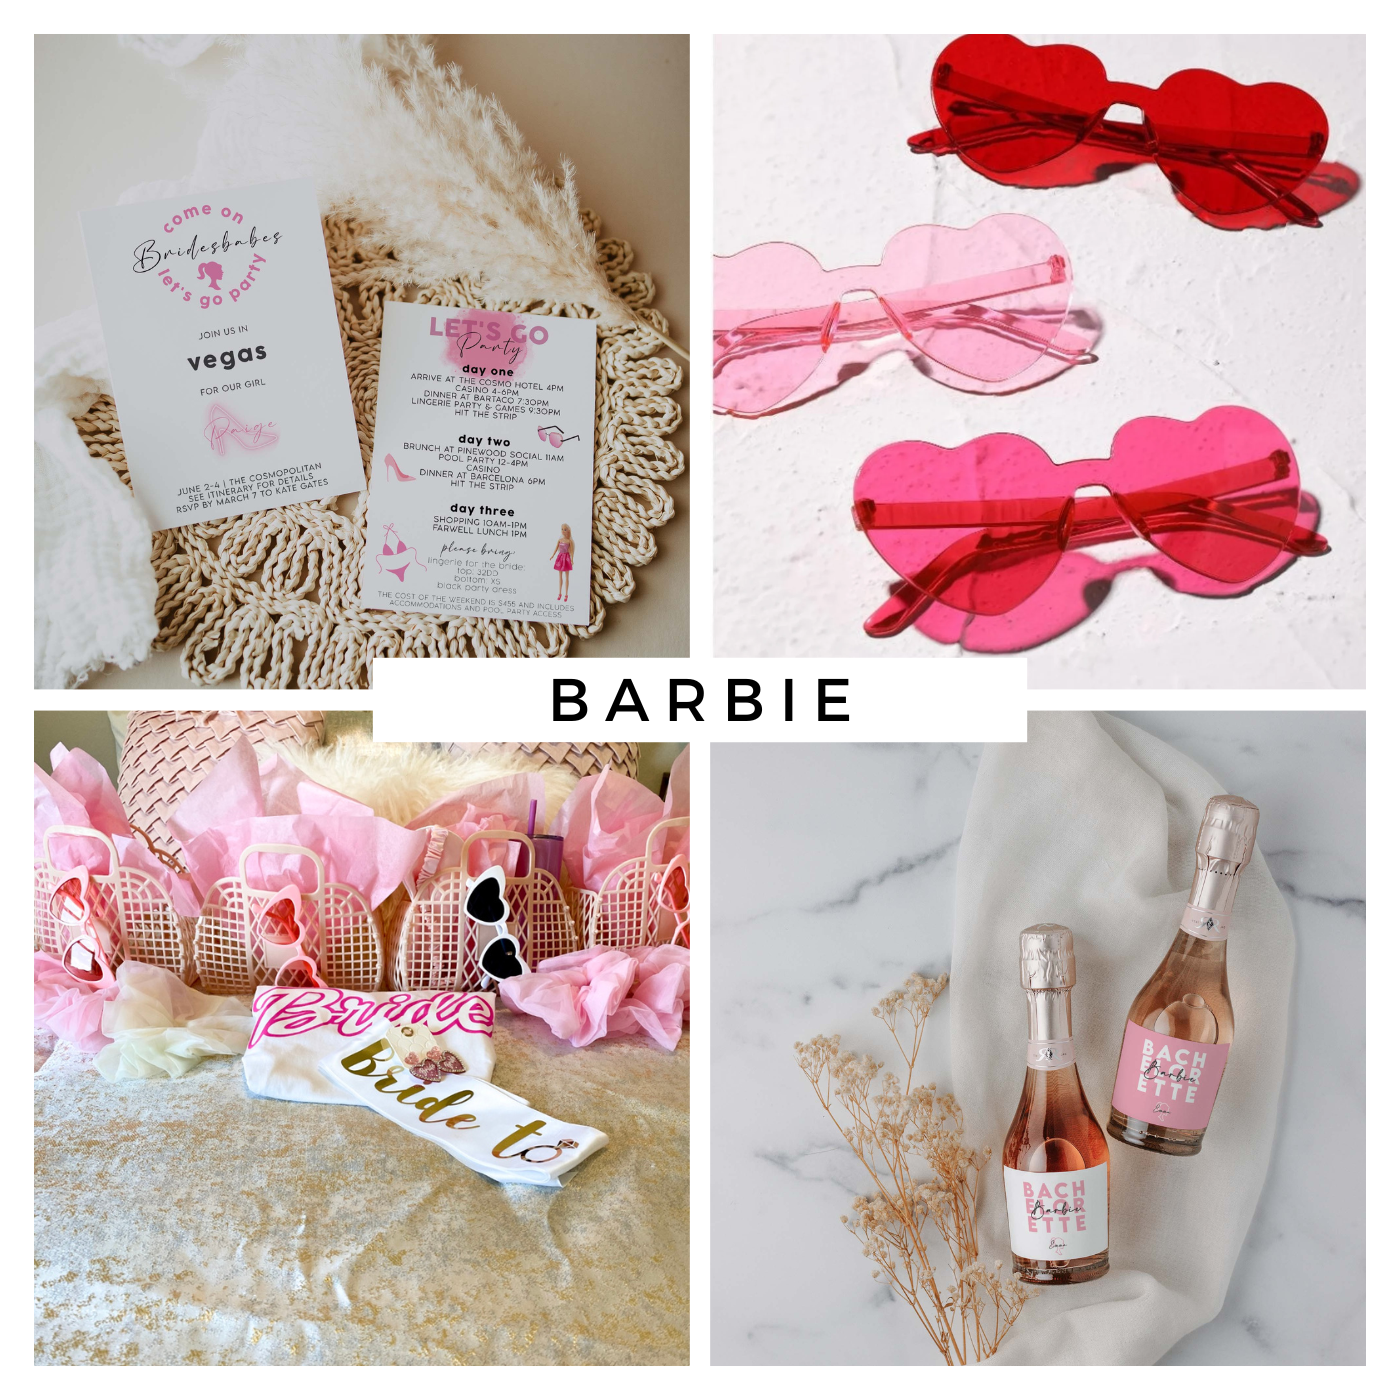 Bach and Boujee Bachelorette Party Favor Bags Bridal Shower -   Bachelorette  party favors, Bachelorette party favor bags, Bachelorette party themes